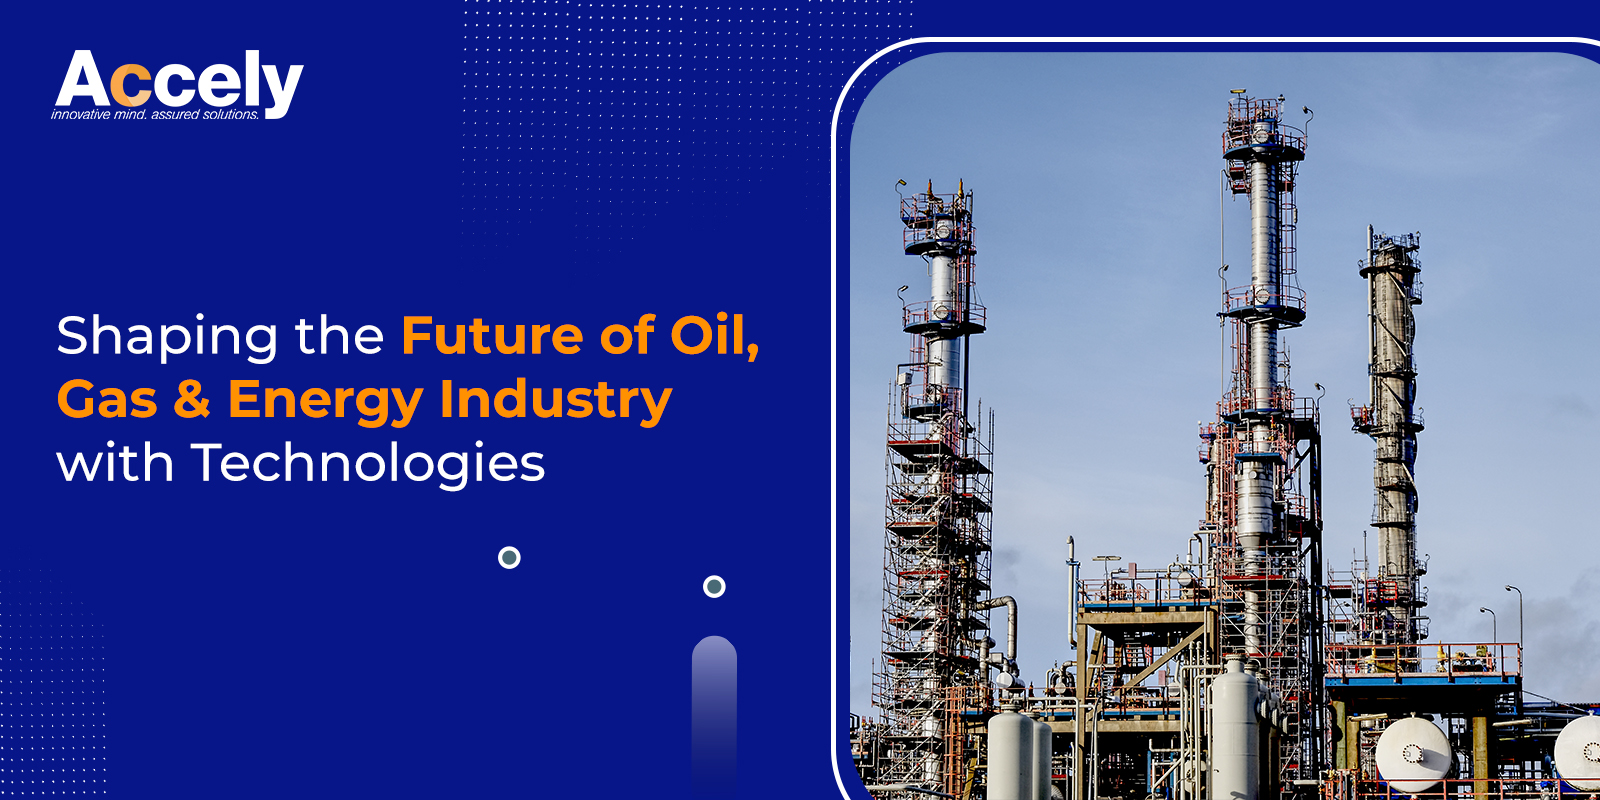 Shaping the Future of Oil, Gas & Energy Industry with Technologies